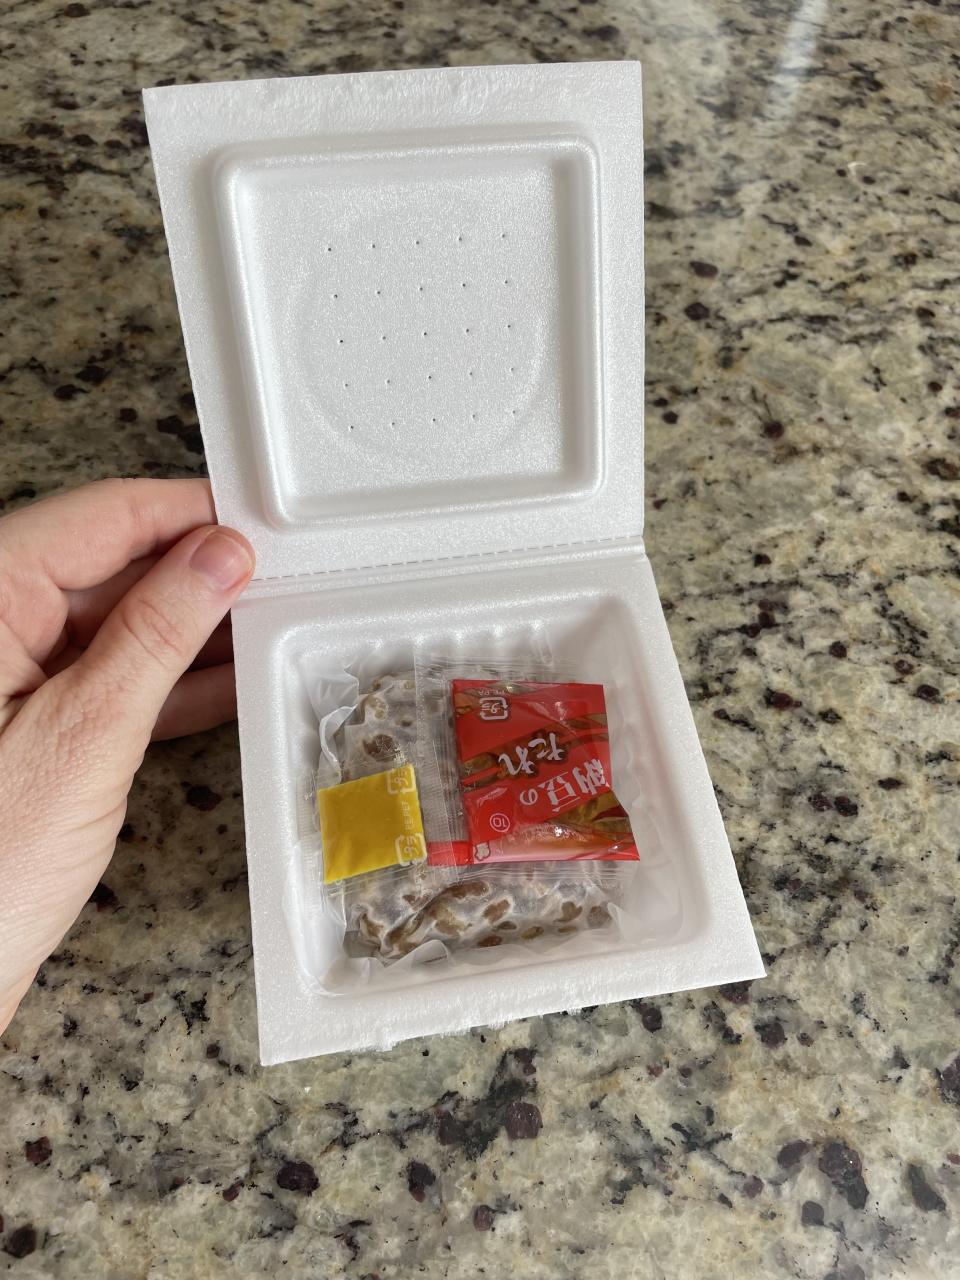 A hand holding an open styrofoam container of natto, with a small packet of sauce and mustard inside